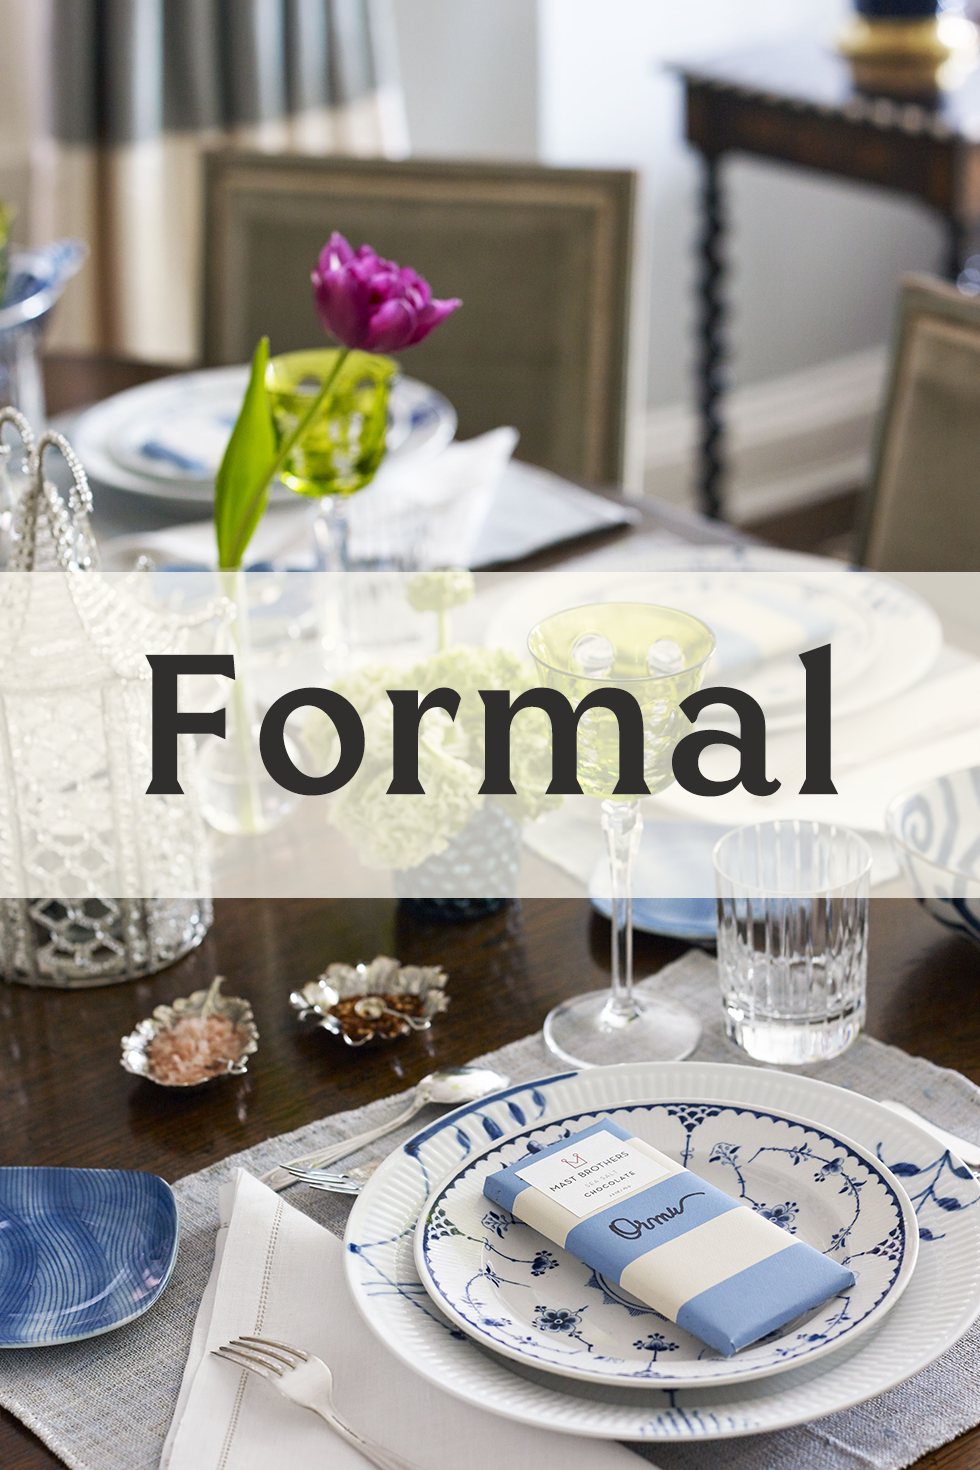 40 Table Setting Decorations, Simple Table Setting Ideas For Everyday